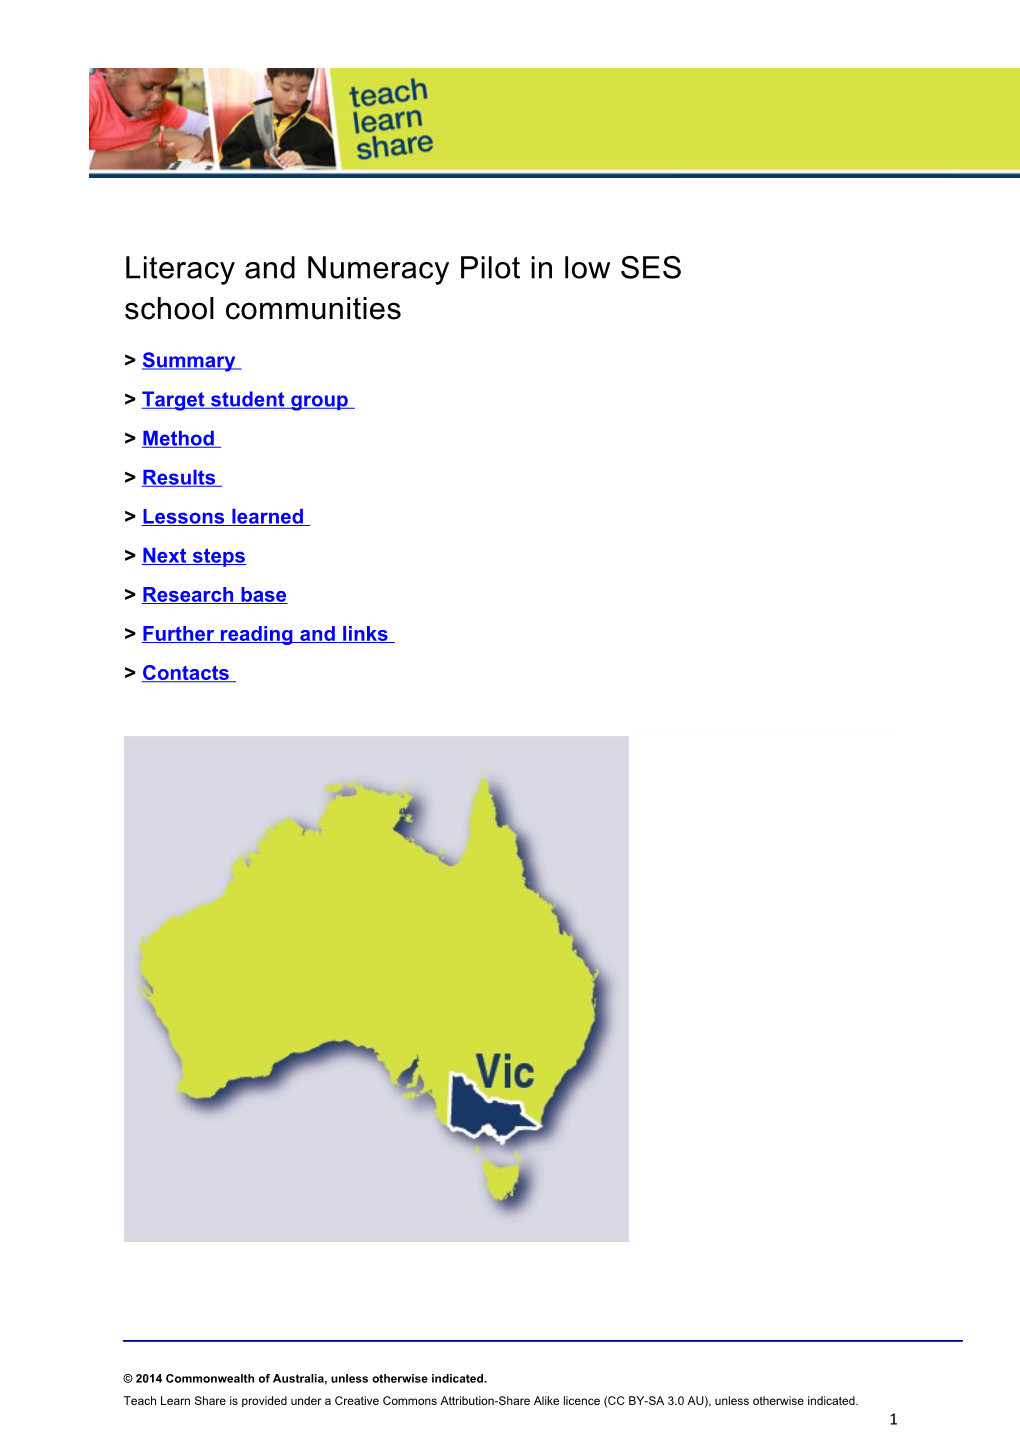 Literacy and Numeracy Pilot in Low SES School Communities